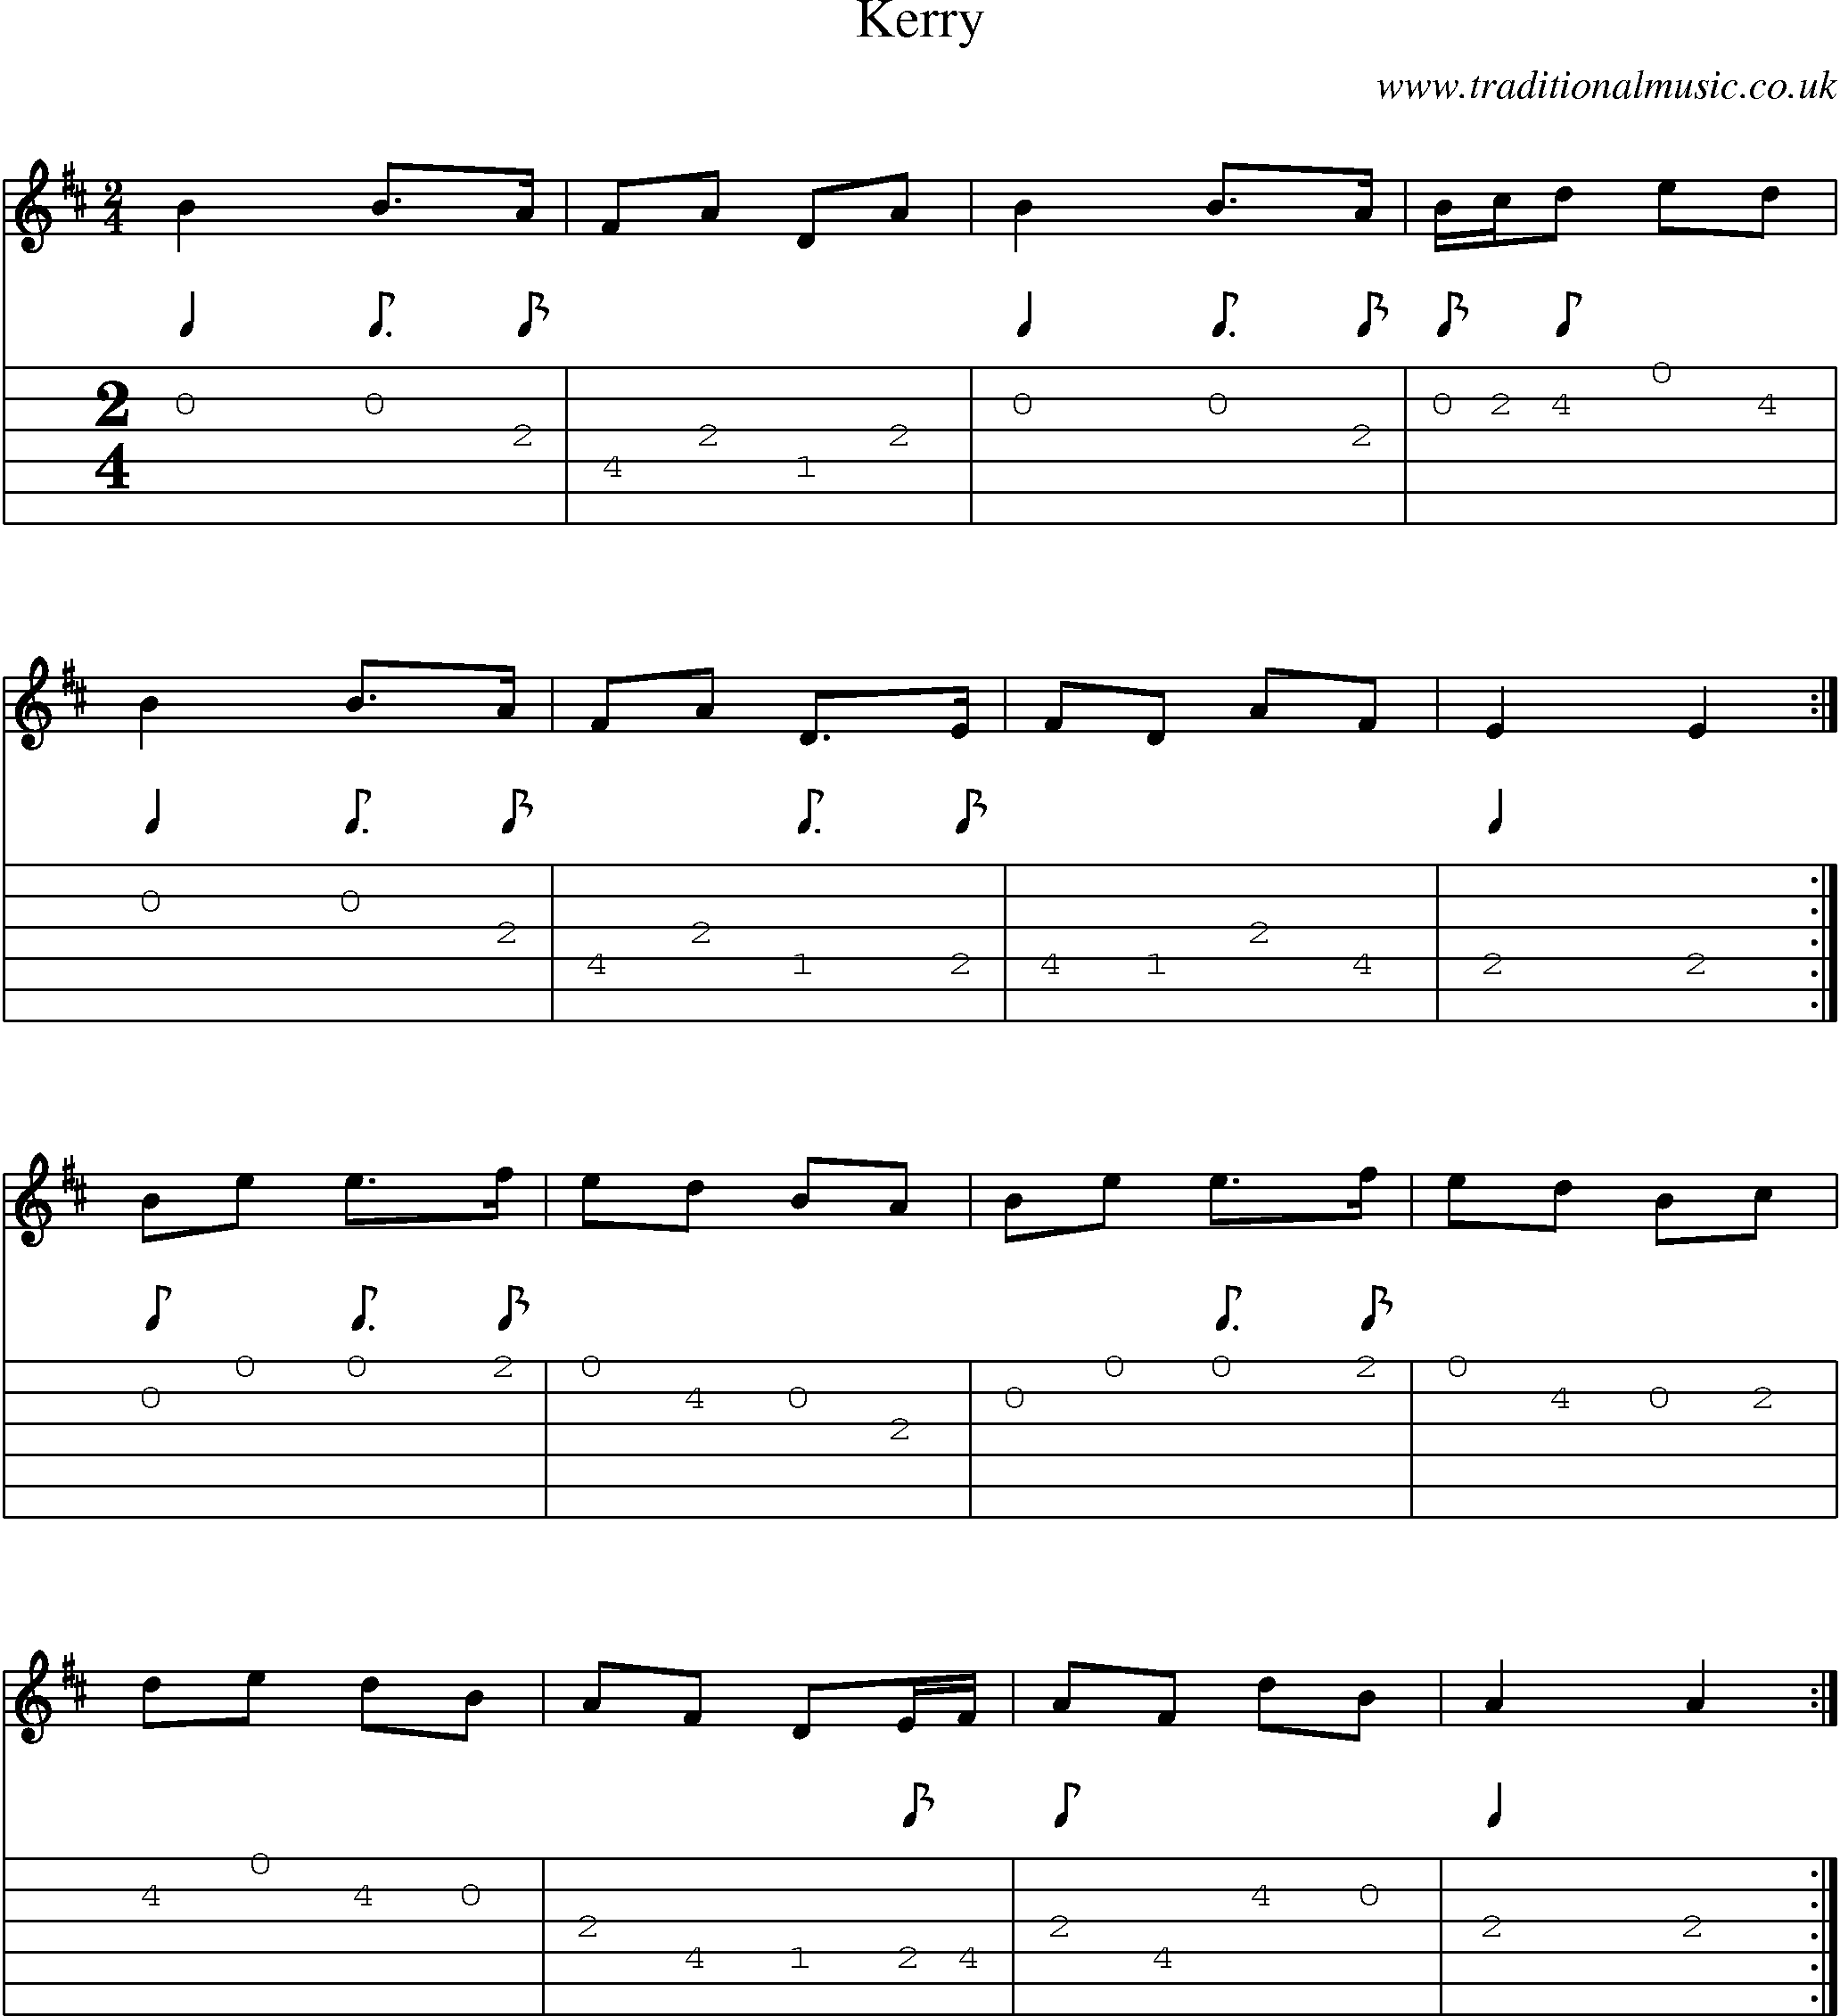 Music Score and Guitar Tabs for Kerry